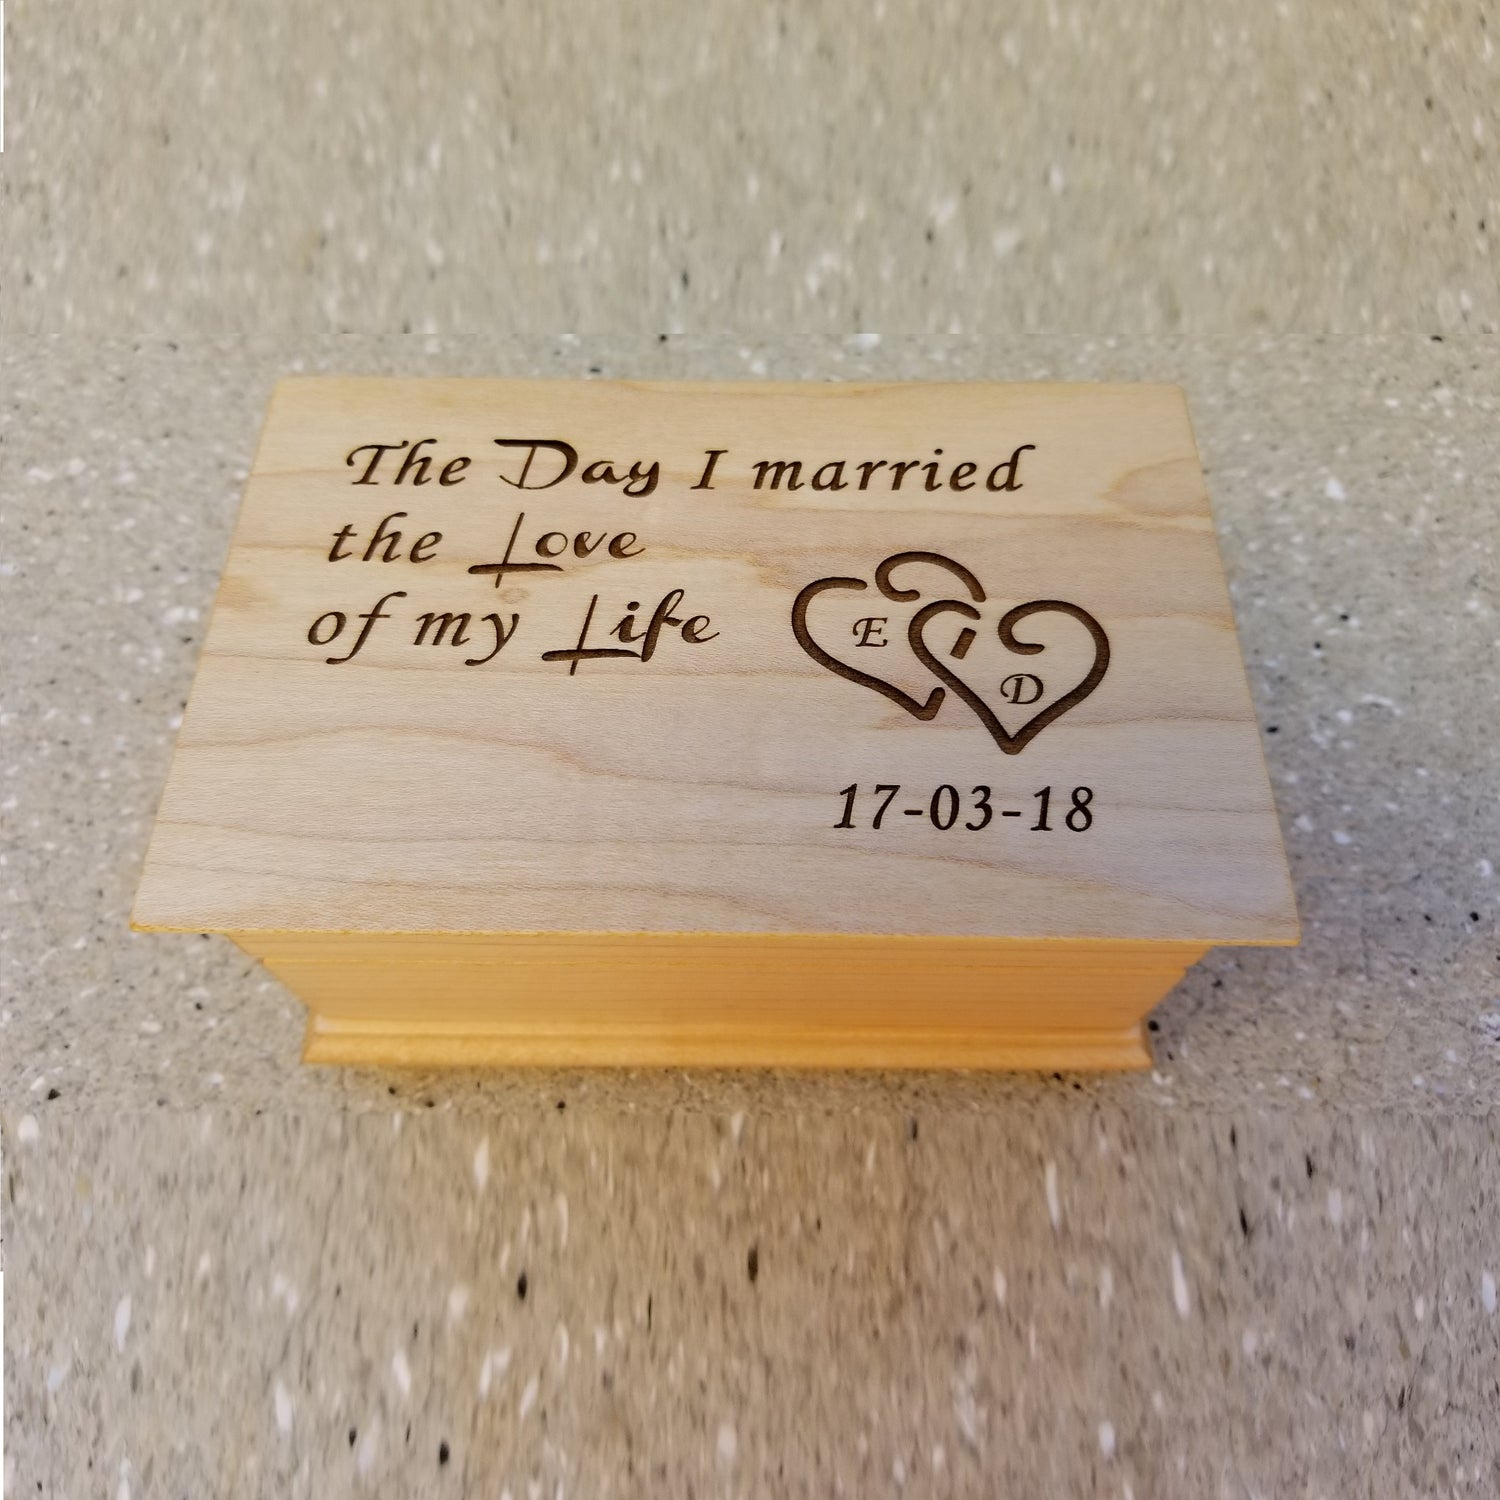 Maple jewelry box with your initials and date along with "The Day I married the Love of my Life, choose your color and song to make it the best gift ever